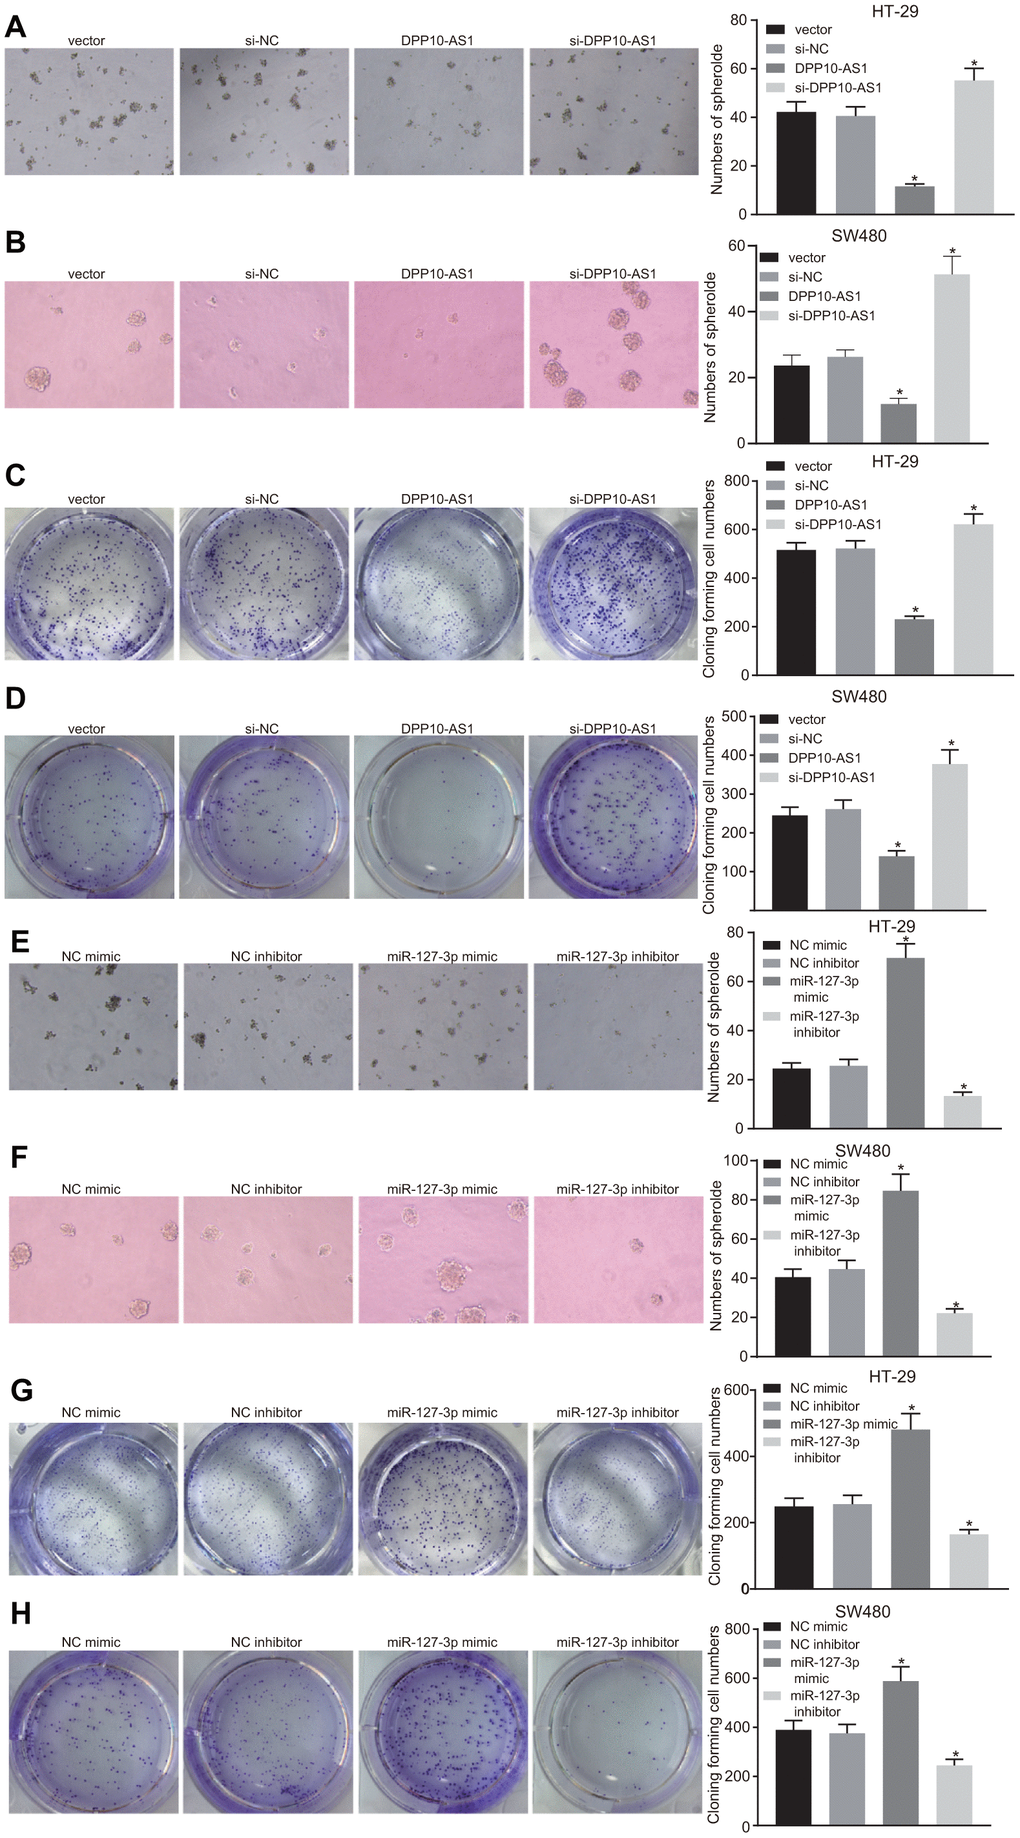 Upregulation of DPP10-AS1 and downregulation of miR-127-3p inhibit the sphere formation and colony formation of HT-29 and SW480 stem cells. (A–D) sphere formation and colony formation of HT29 and SW480 stem cells after DPP10-AS1 expression was altered; (E–H) sphere formation and colony formation of HT29 and SW480 stem cells after miR-127-3p expression was altered. *, p vs. vector and si-NC, or NC mimic and NC inhibitor. The measurement data were expressed as mean ± standard deviation. The data among multiple groups were analyzed by one-way ANOVA followed by a Tukey’s post hoc test. The experiment was repeated three times. DPP10-AS1, cells transfected with DPP10-AS1 plasmid; si-DPP10-AS1, cells transfected with si-DPP10-AS1; si-NC, cells transfected with si-negative control plasmid; miR-127-3p mimic, cells transfected with miR-127-3p mimic plasmid; NC mimic, cells transfected with negative control mimic plasmid.